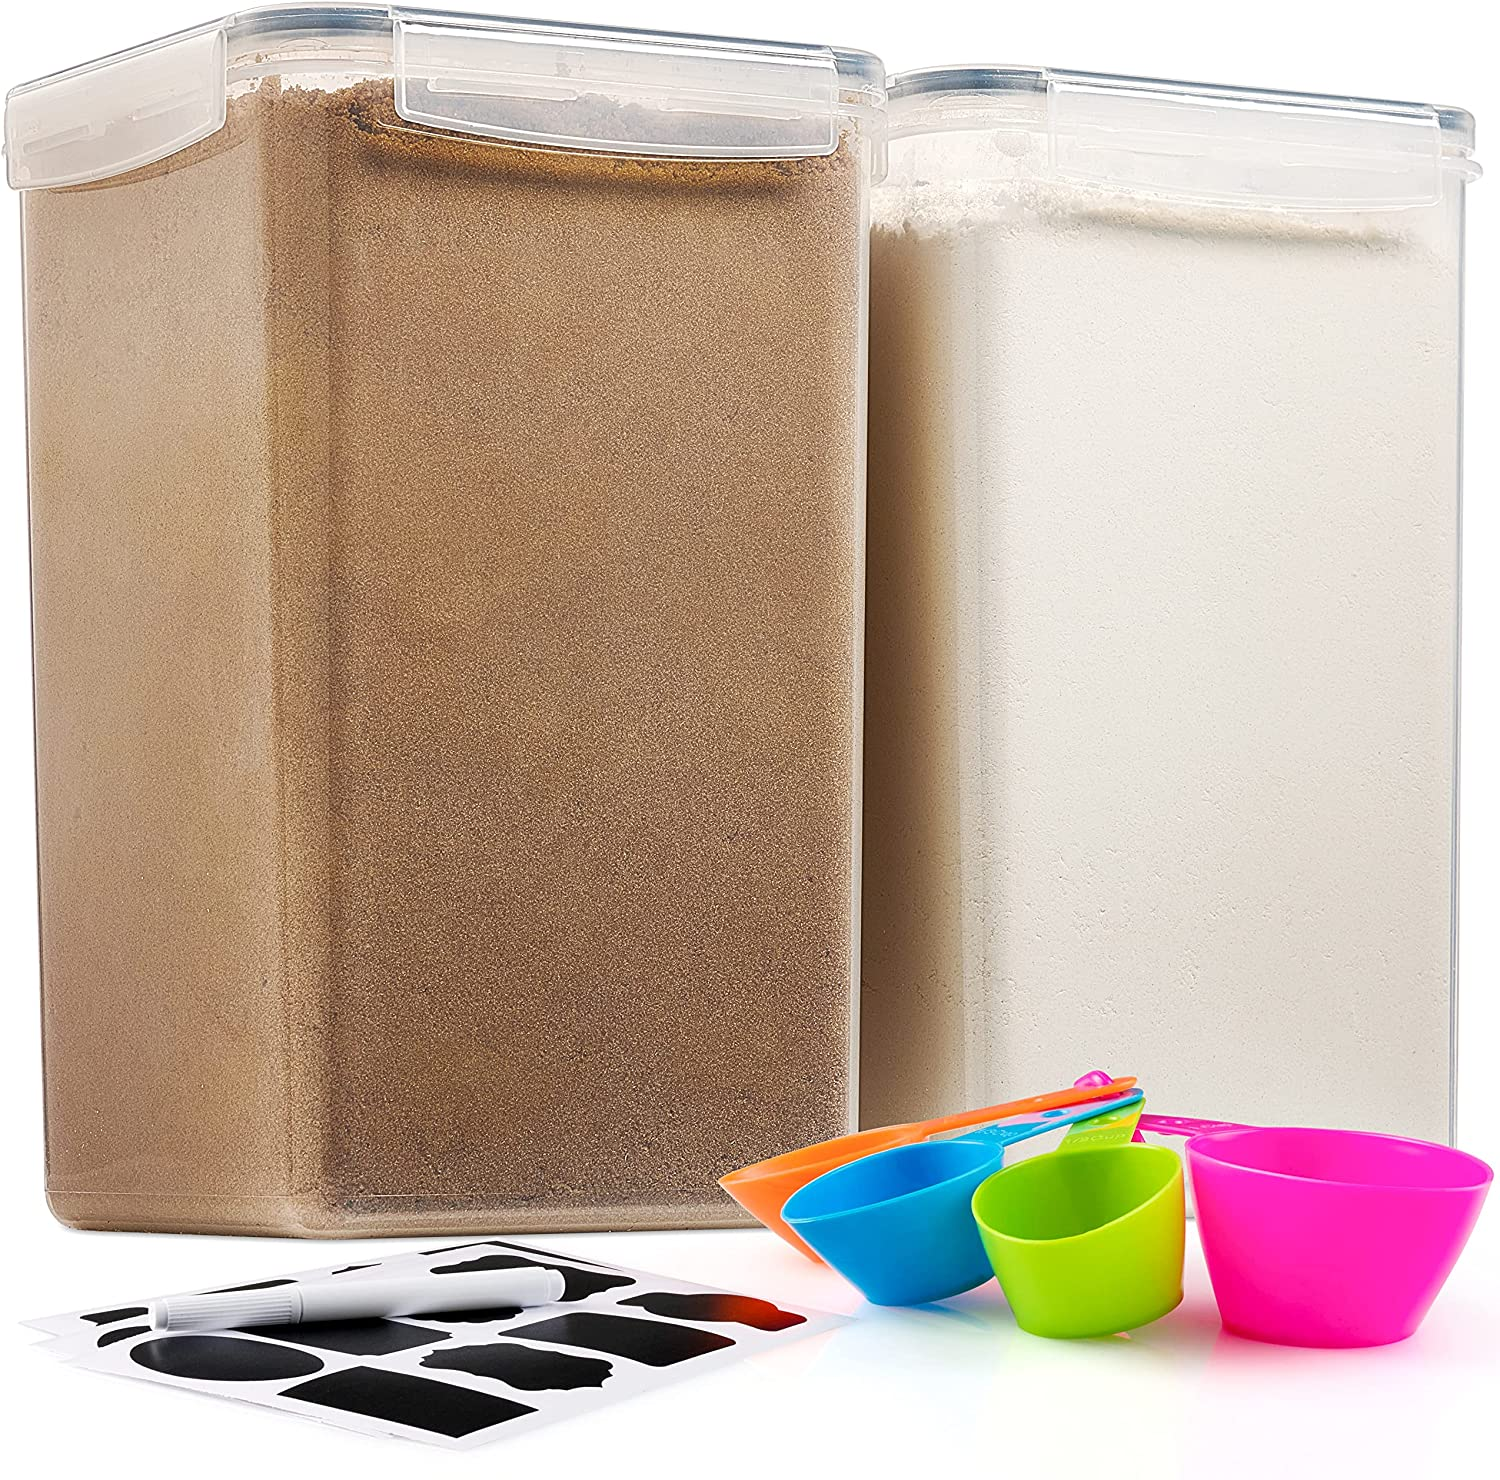 2 Pack Extra Large Airtight Food Storage Containers - 6.5L / 220 Oz Flour With Labels, Marker & Spoon Set